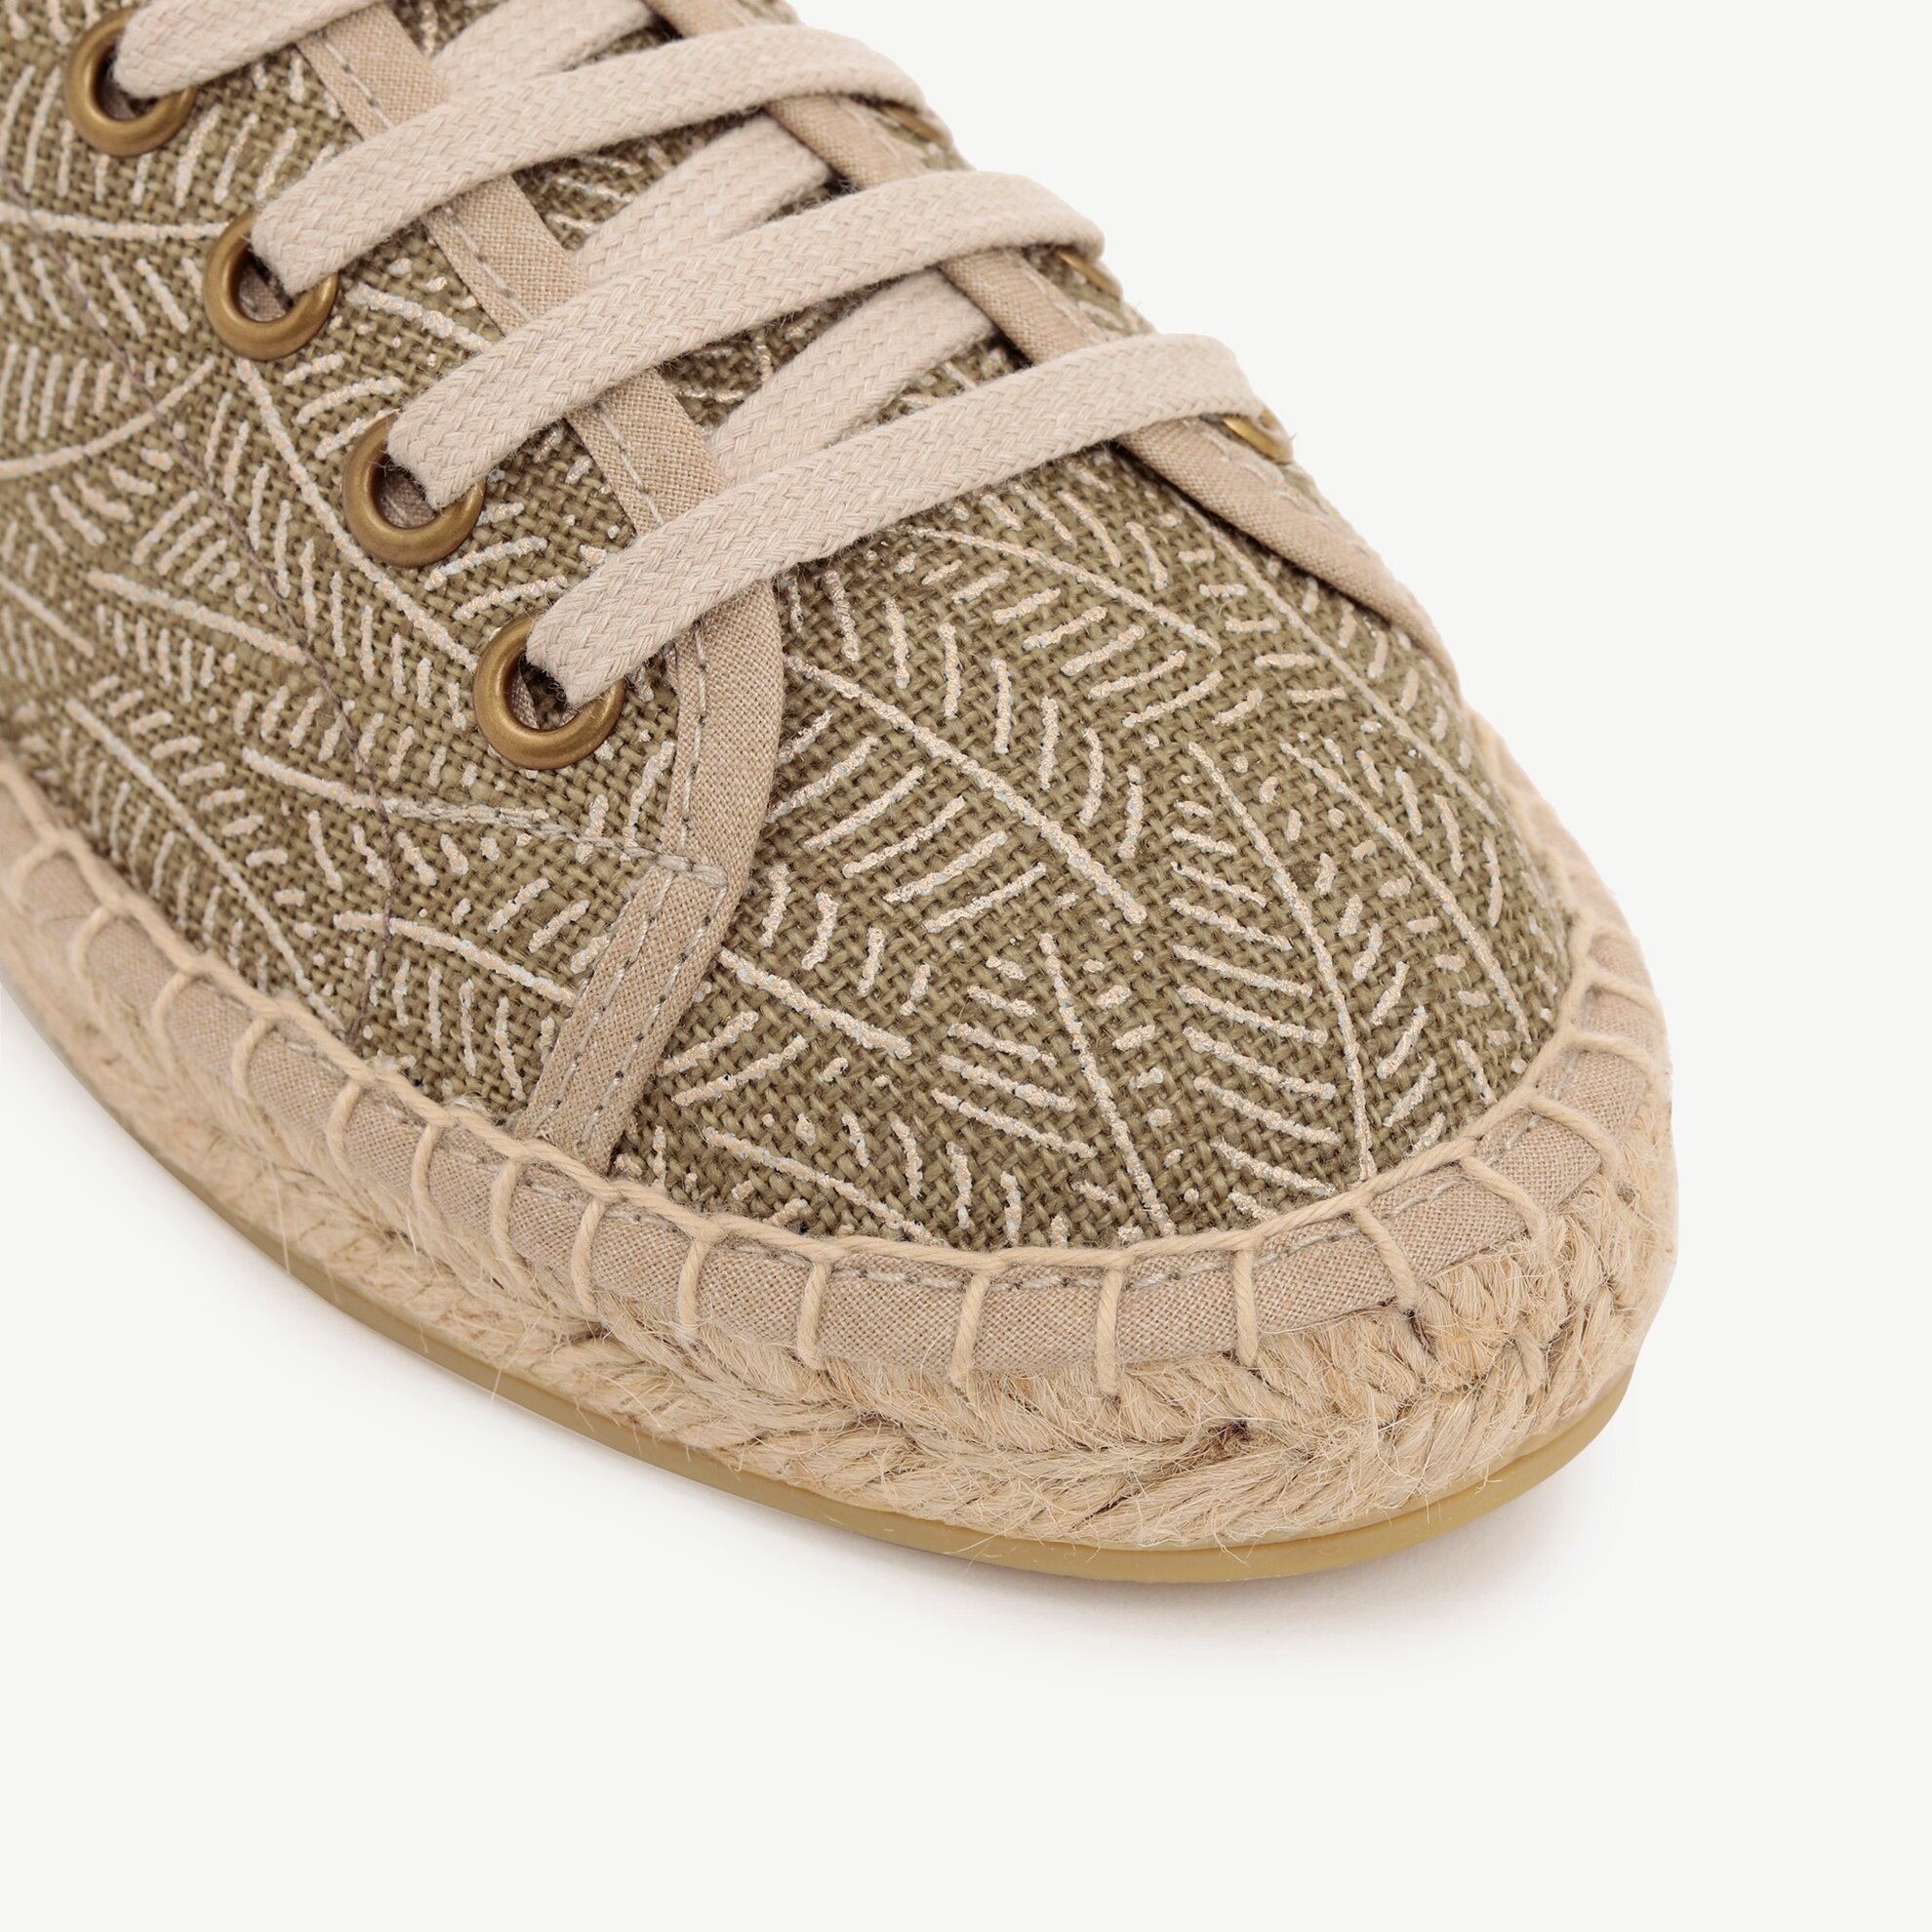 Laced Espadrille With Leave Printed Fabric